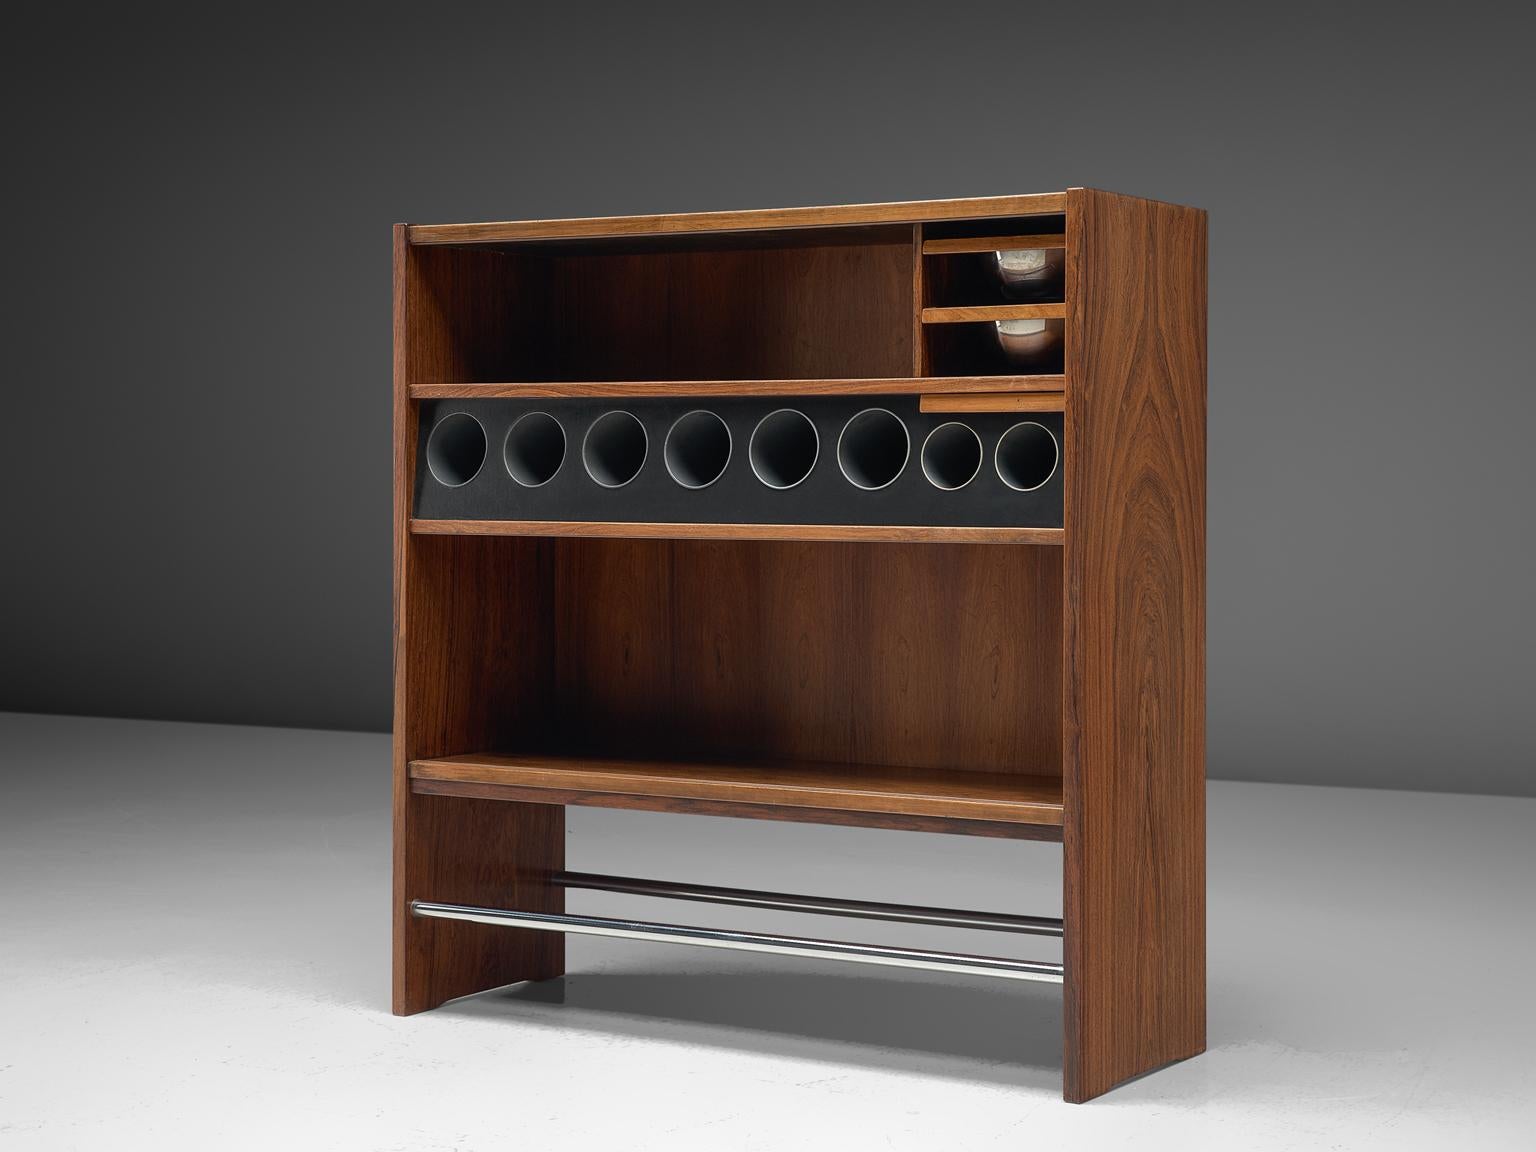 Erik Buch, dry bar, rosewood, Denmark, 1950s.

Elegant Danish dry bar, 1950s. The bar shows a lot of interesting lines and stunning details. In its form the piece is simplistic, yet it is versatile in use. The front is completely covered in a large